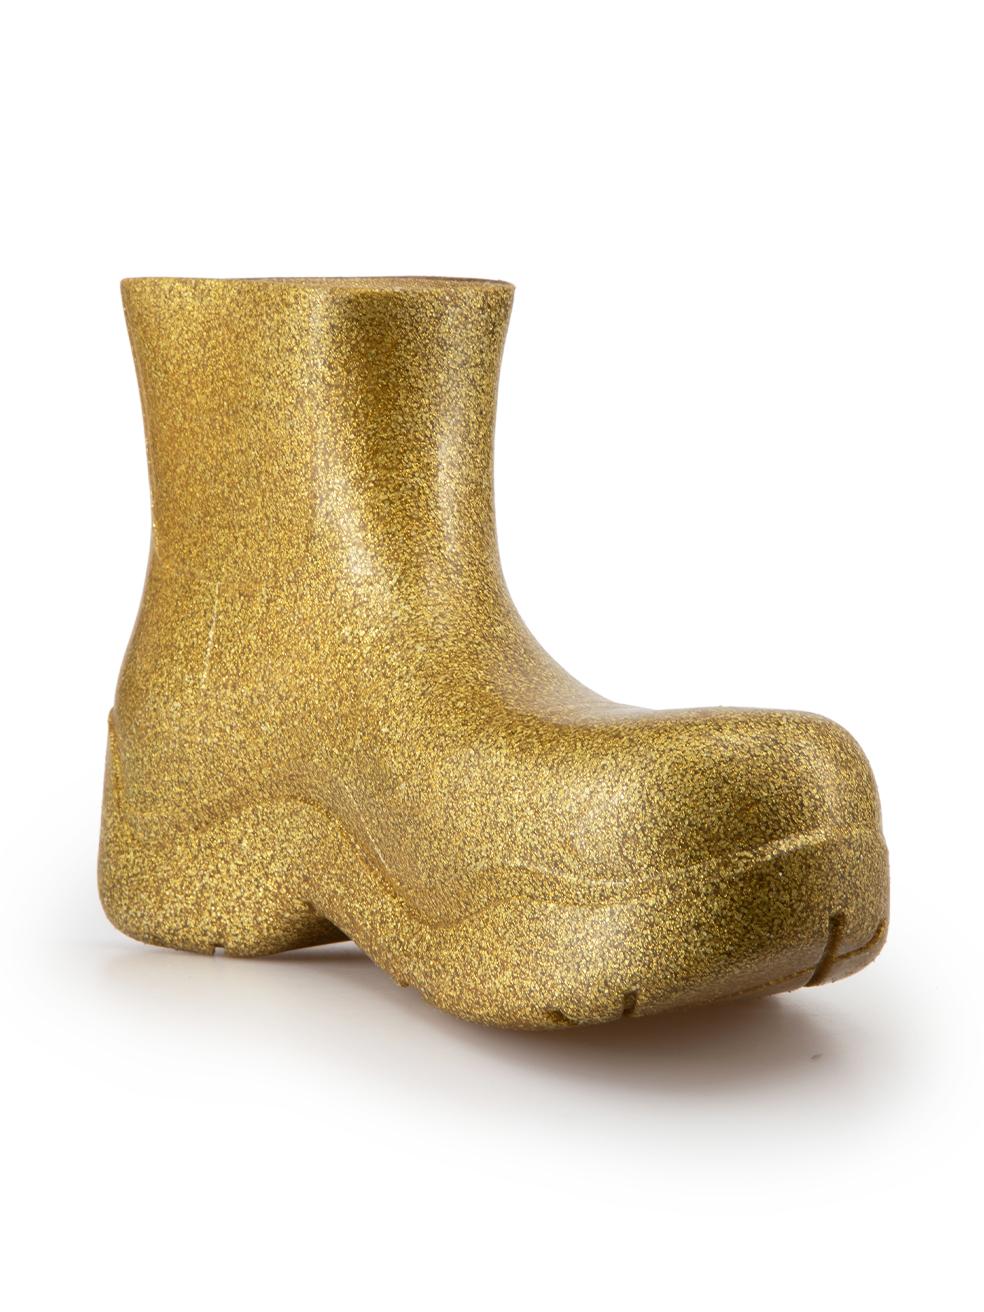 CONDITION is Very good. Hardly any visible wear to boots is evident on this used Bottega Veneta designer resale item. Size hidden on sole by glitter design.
  
Details
Puddle
Gold
Rubber glitter
Rain boots
Round toe
Platform
  
Made in Italy
 